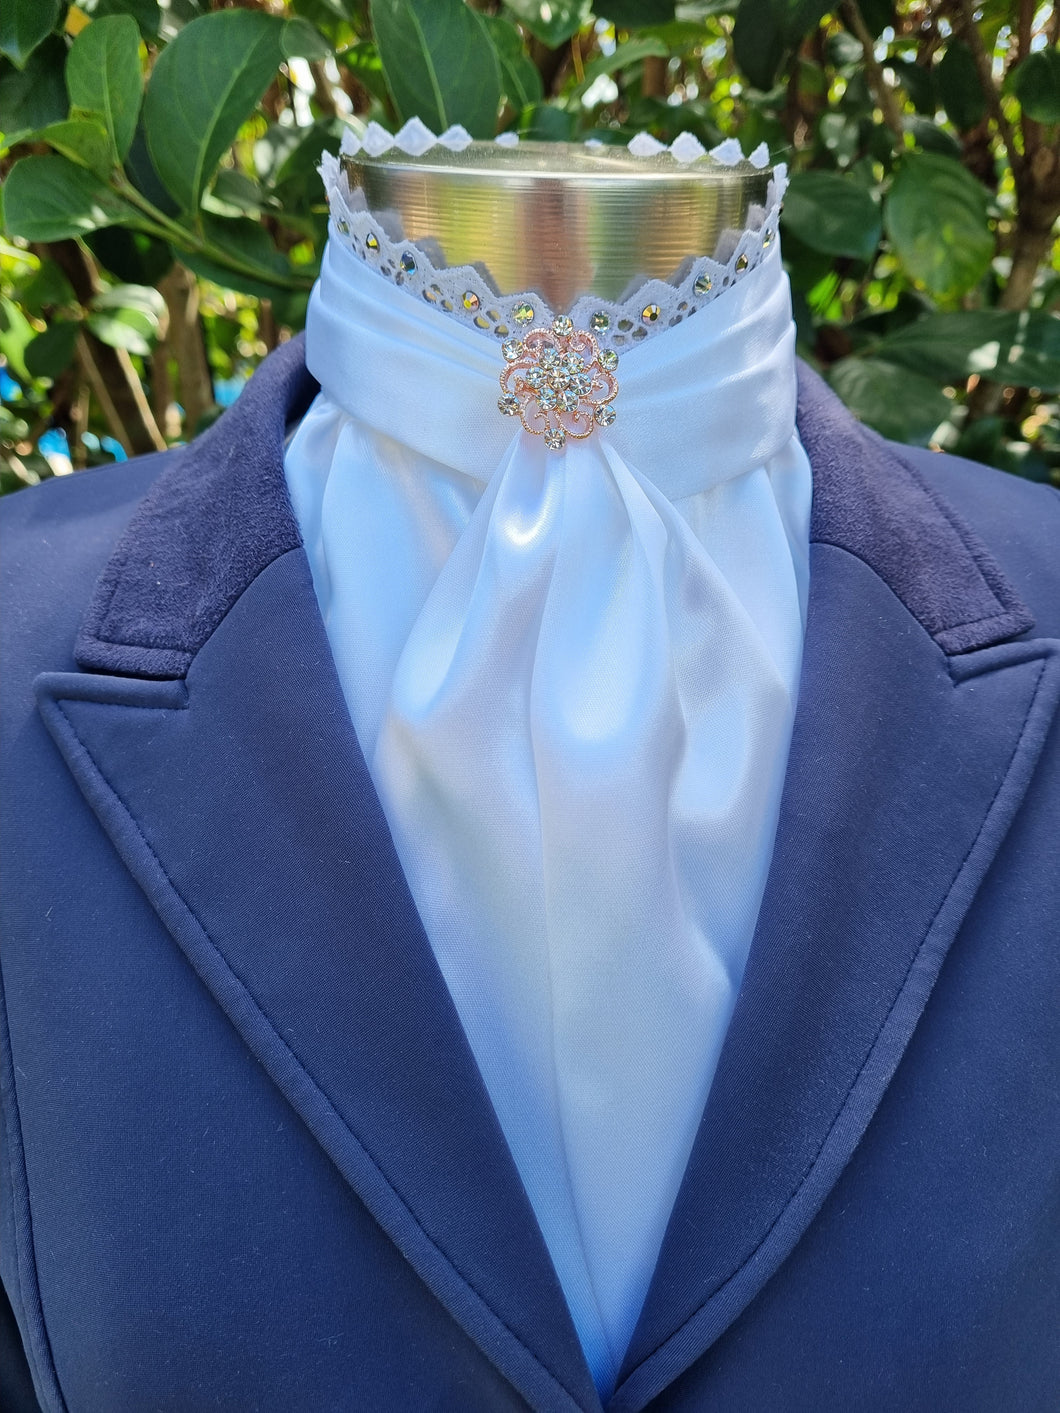 ERA EURO BELLE with PEARLS & CRYSTALS Stock Tie - White lustre satin with, lace frill, rose gold & clear crystals and rose gold brooch